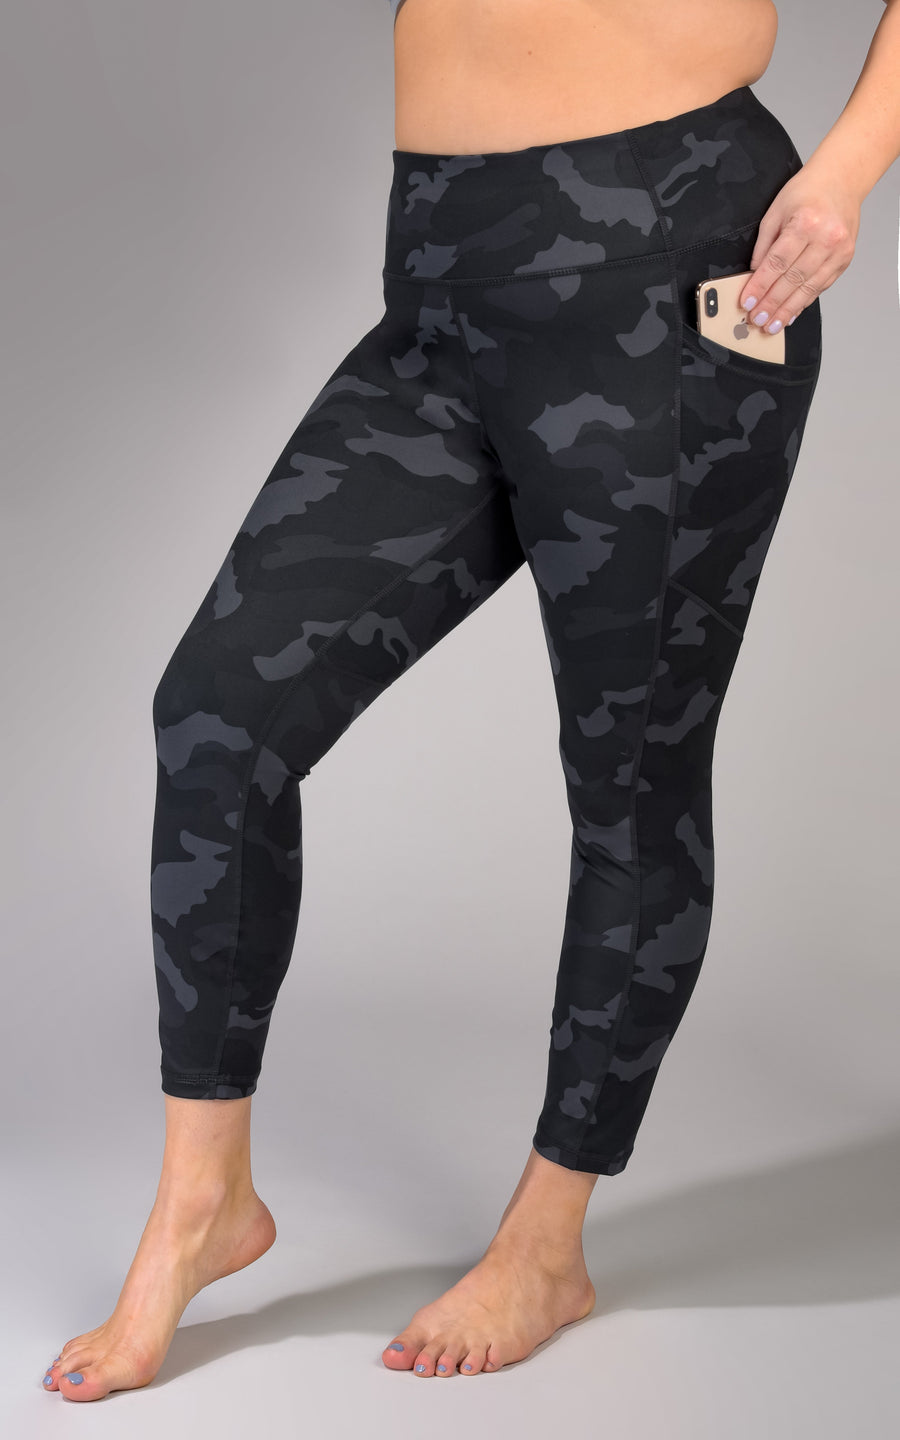 Yogalicious Lux Camo High Waisted Side Pocket Black Gray Leggings Size Small  - $15 - From Kelly